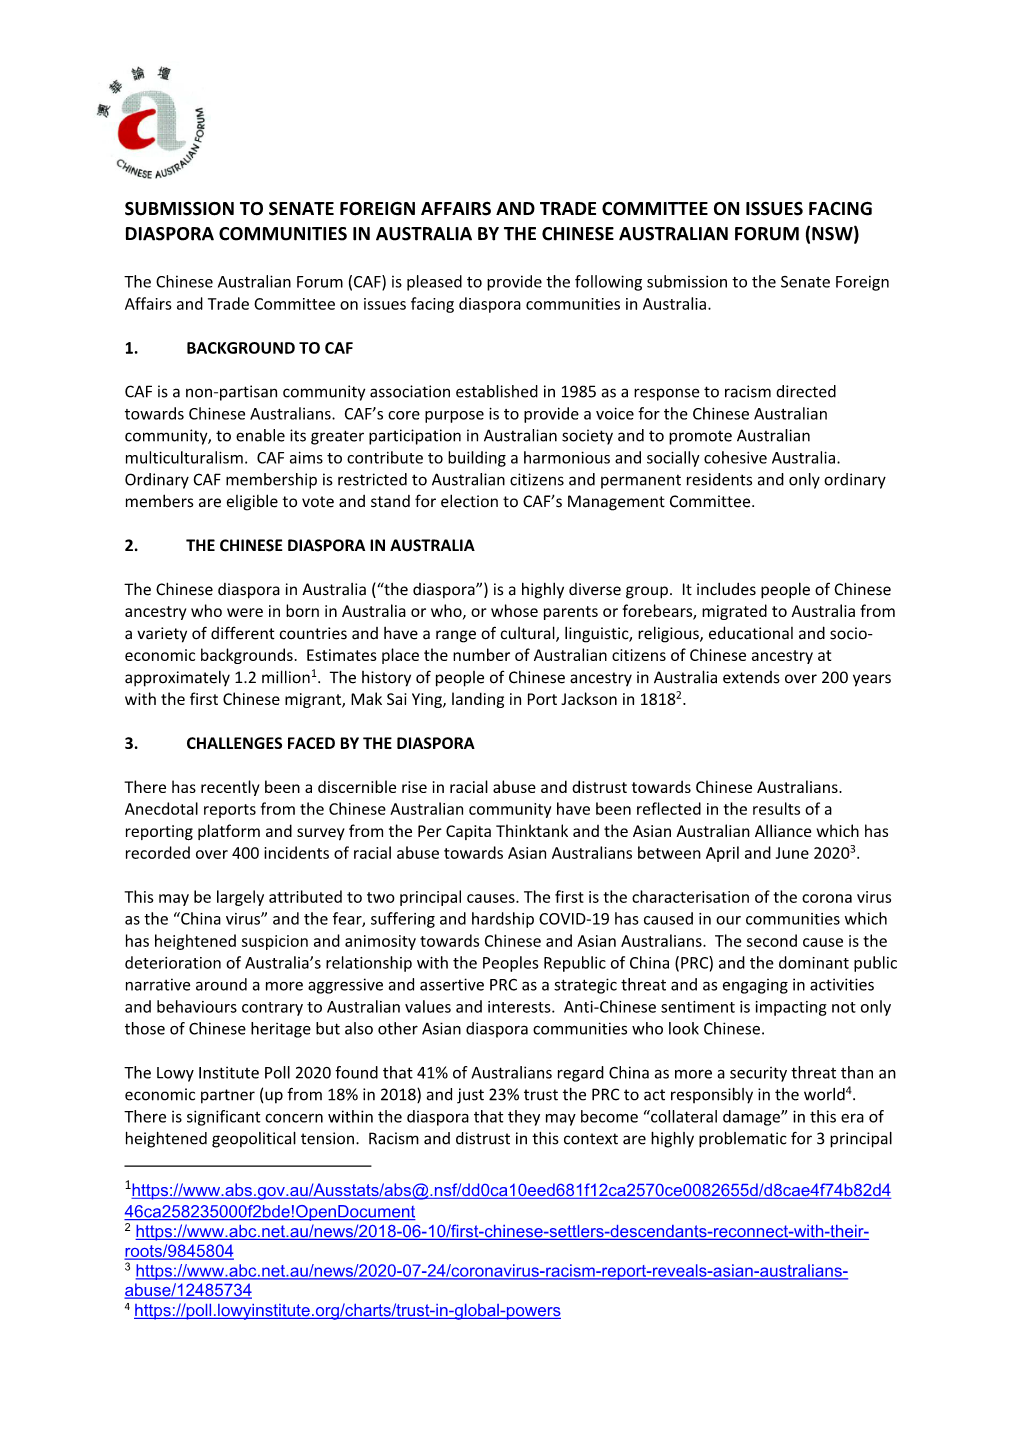 Submission to Senate Foreign Affairs and Trade Committee on Issues Facing Diaspora Communities in Australia by the Chinese Australian Forum (Nsw)